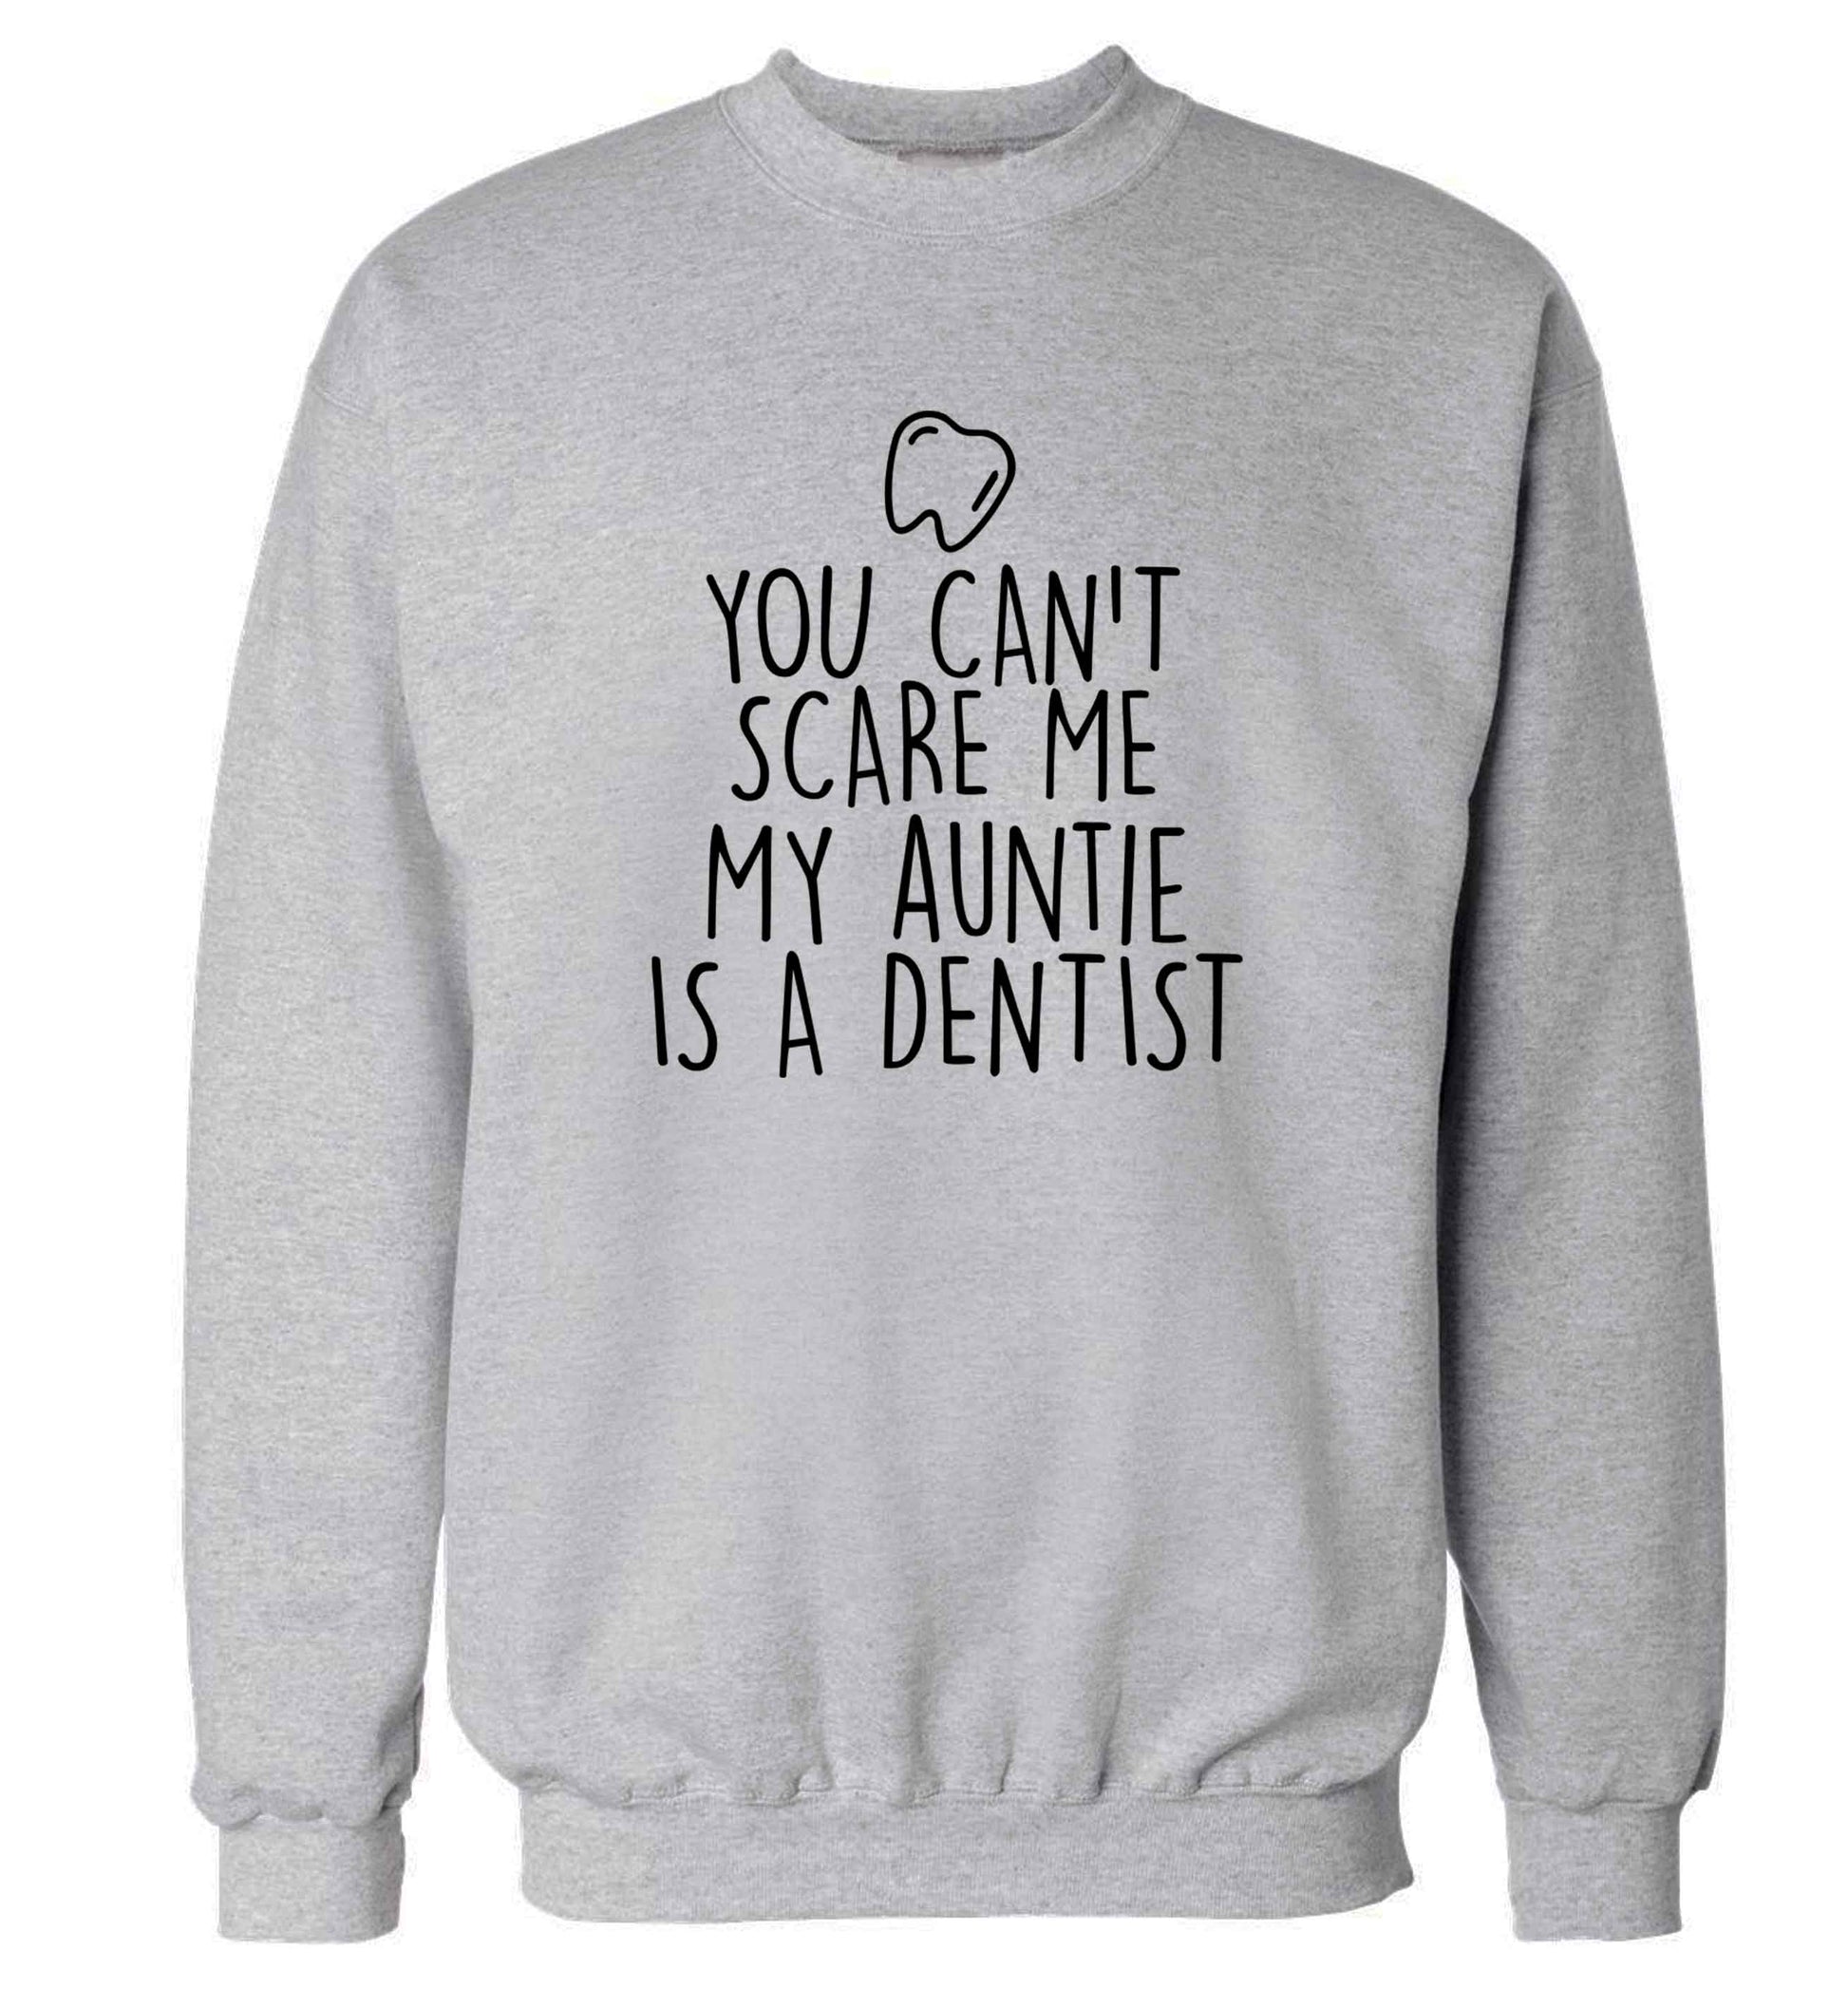 You can't scare me my auntie is a dentist adult's unisex grey sweater 2XL